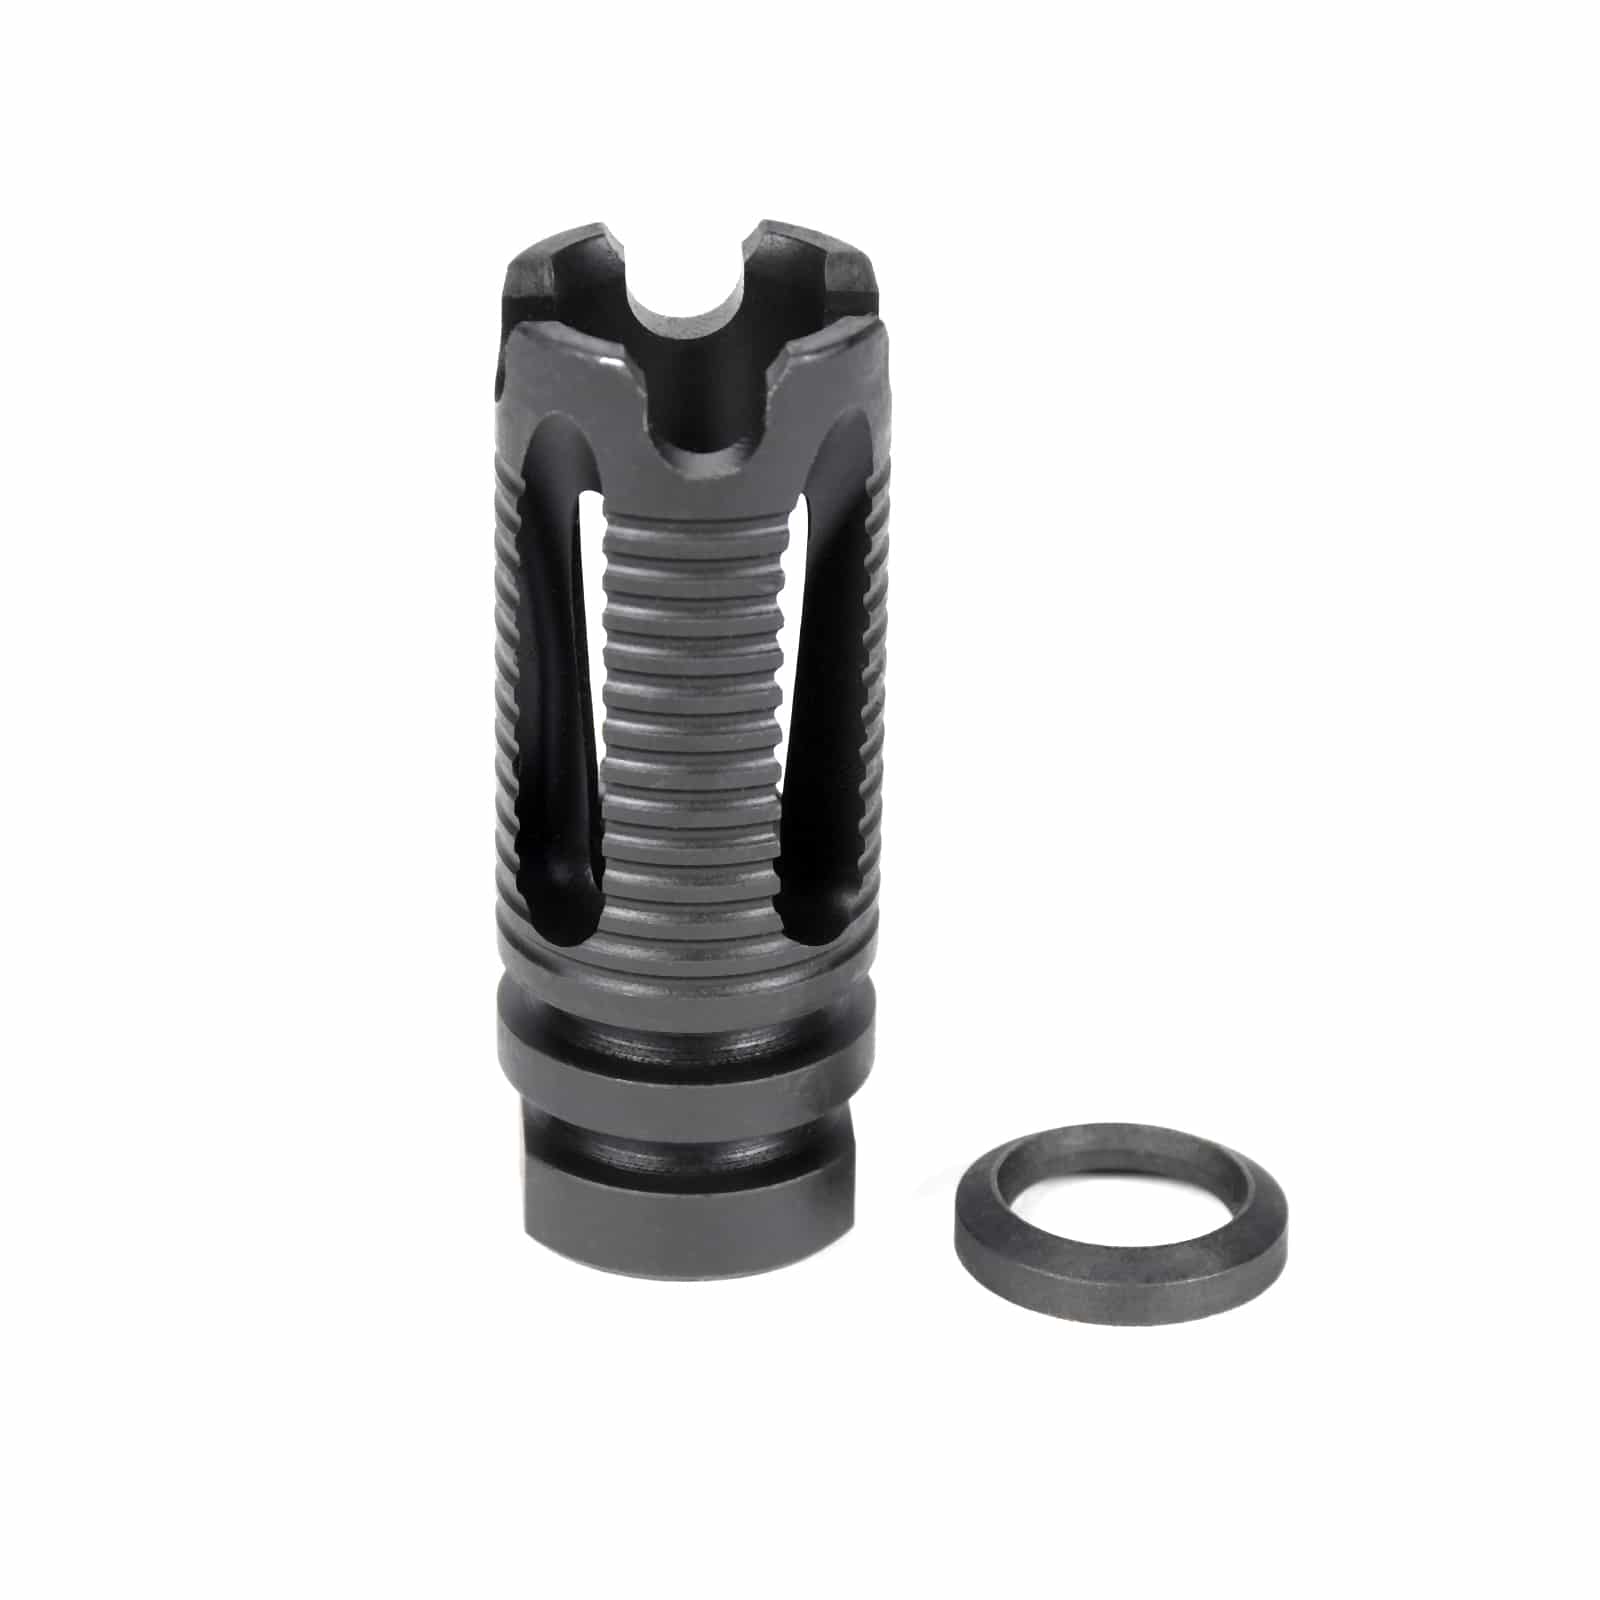 AT3 4-Port Combat Flash Hider with Crush Washer